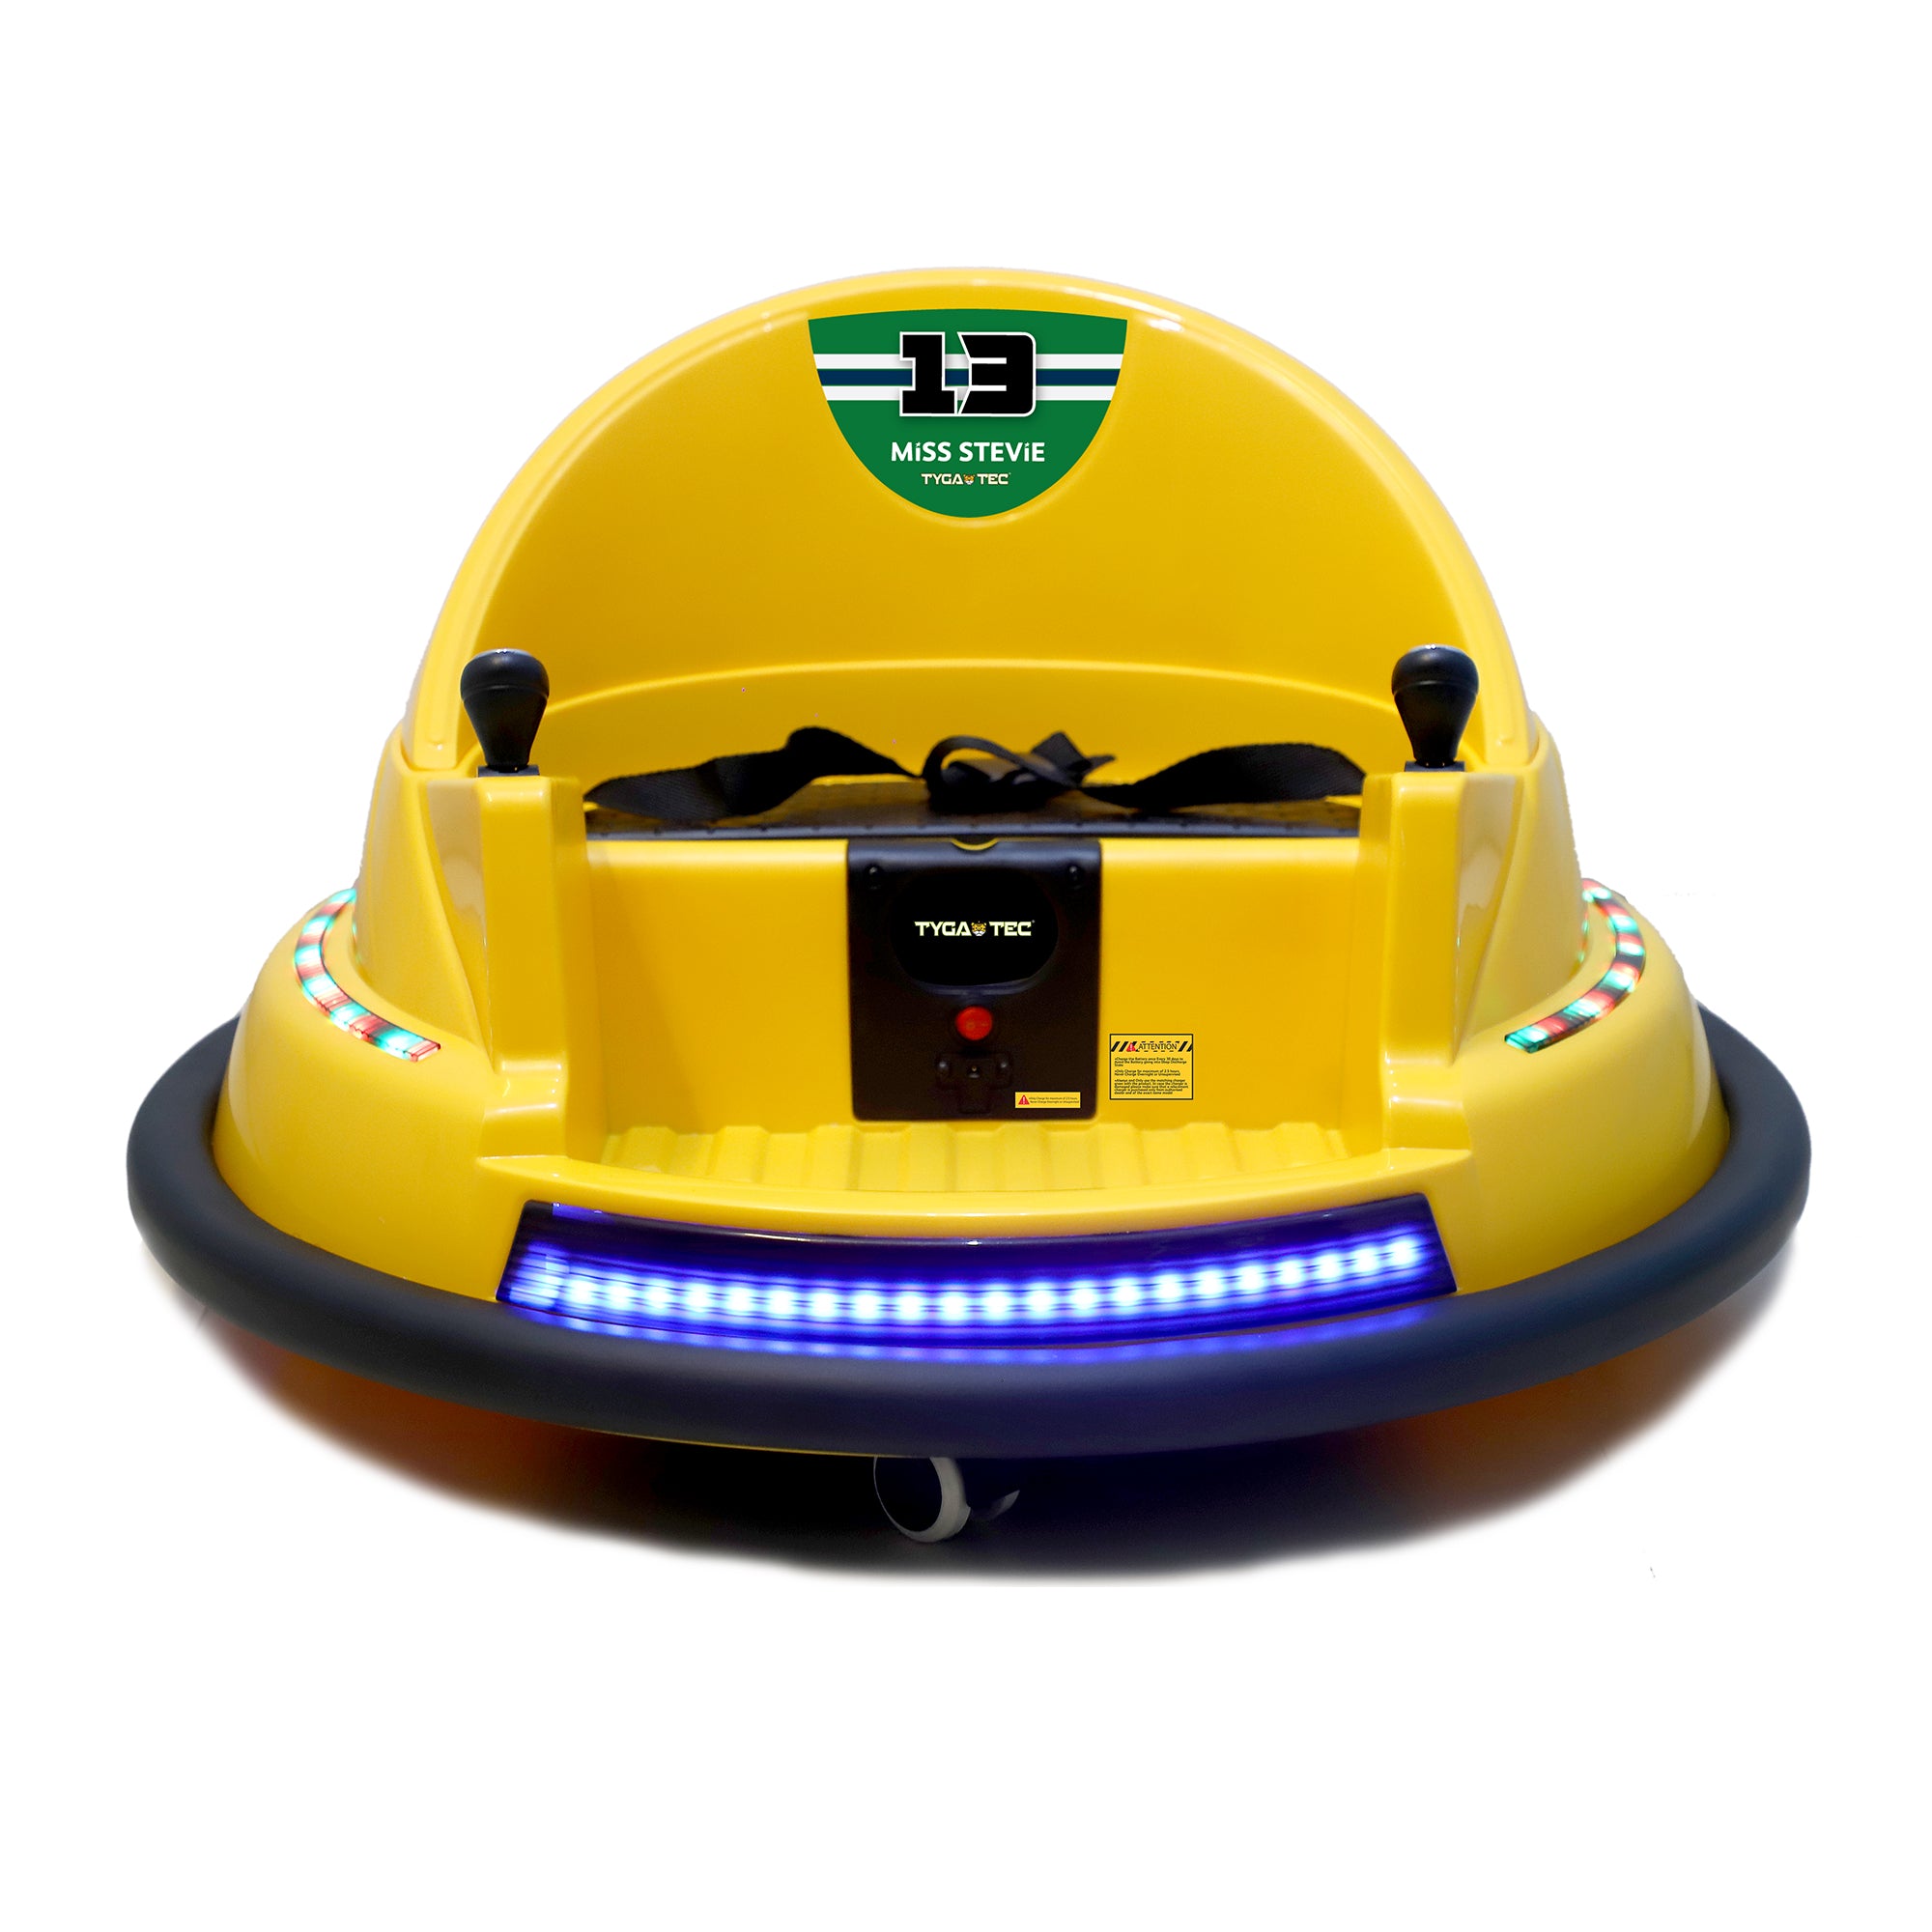 Tygatec electric Bumper Car for Kids &Toddlers with LED Lights and 360 degree Spin ( Yellow color )